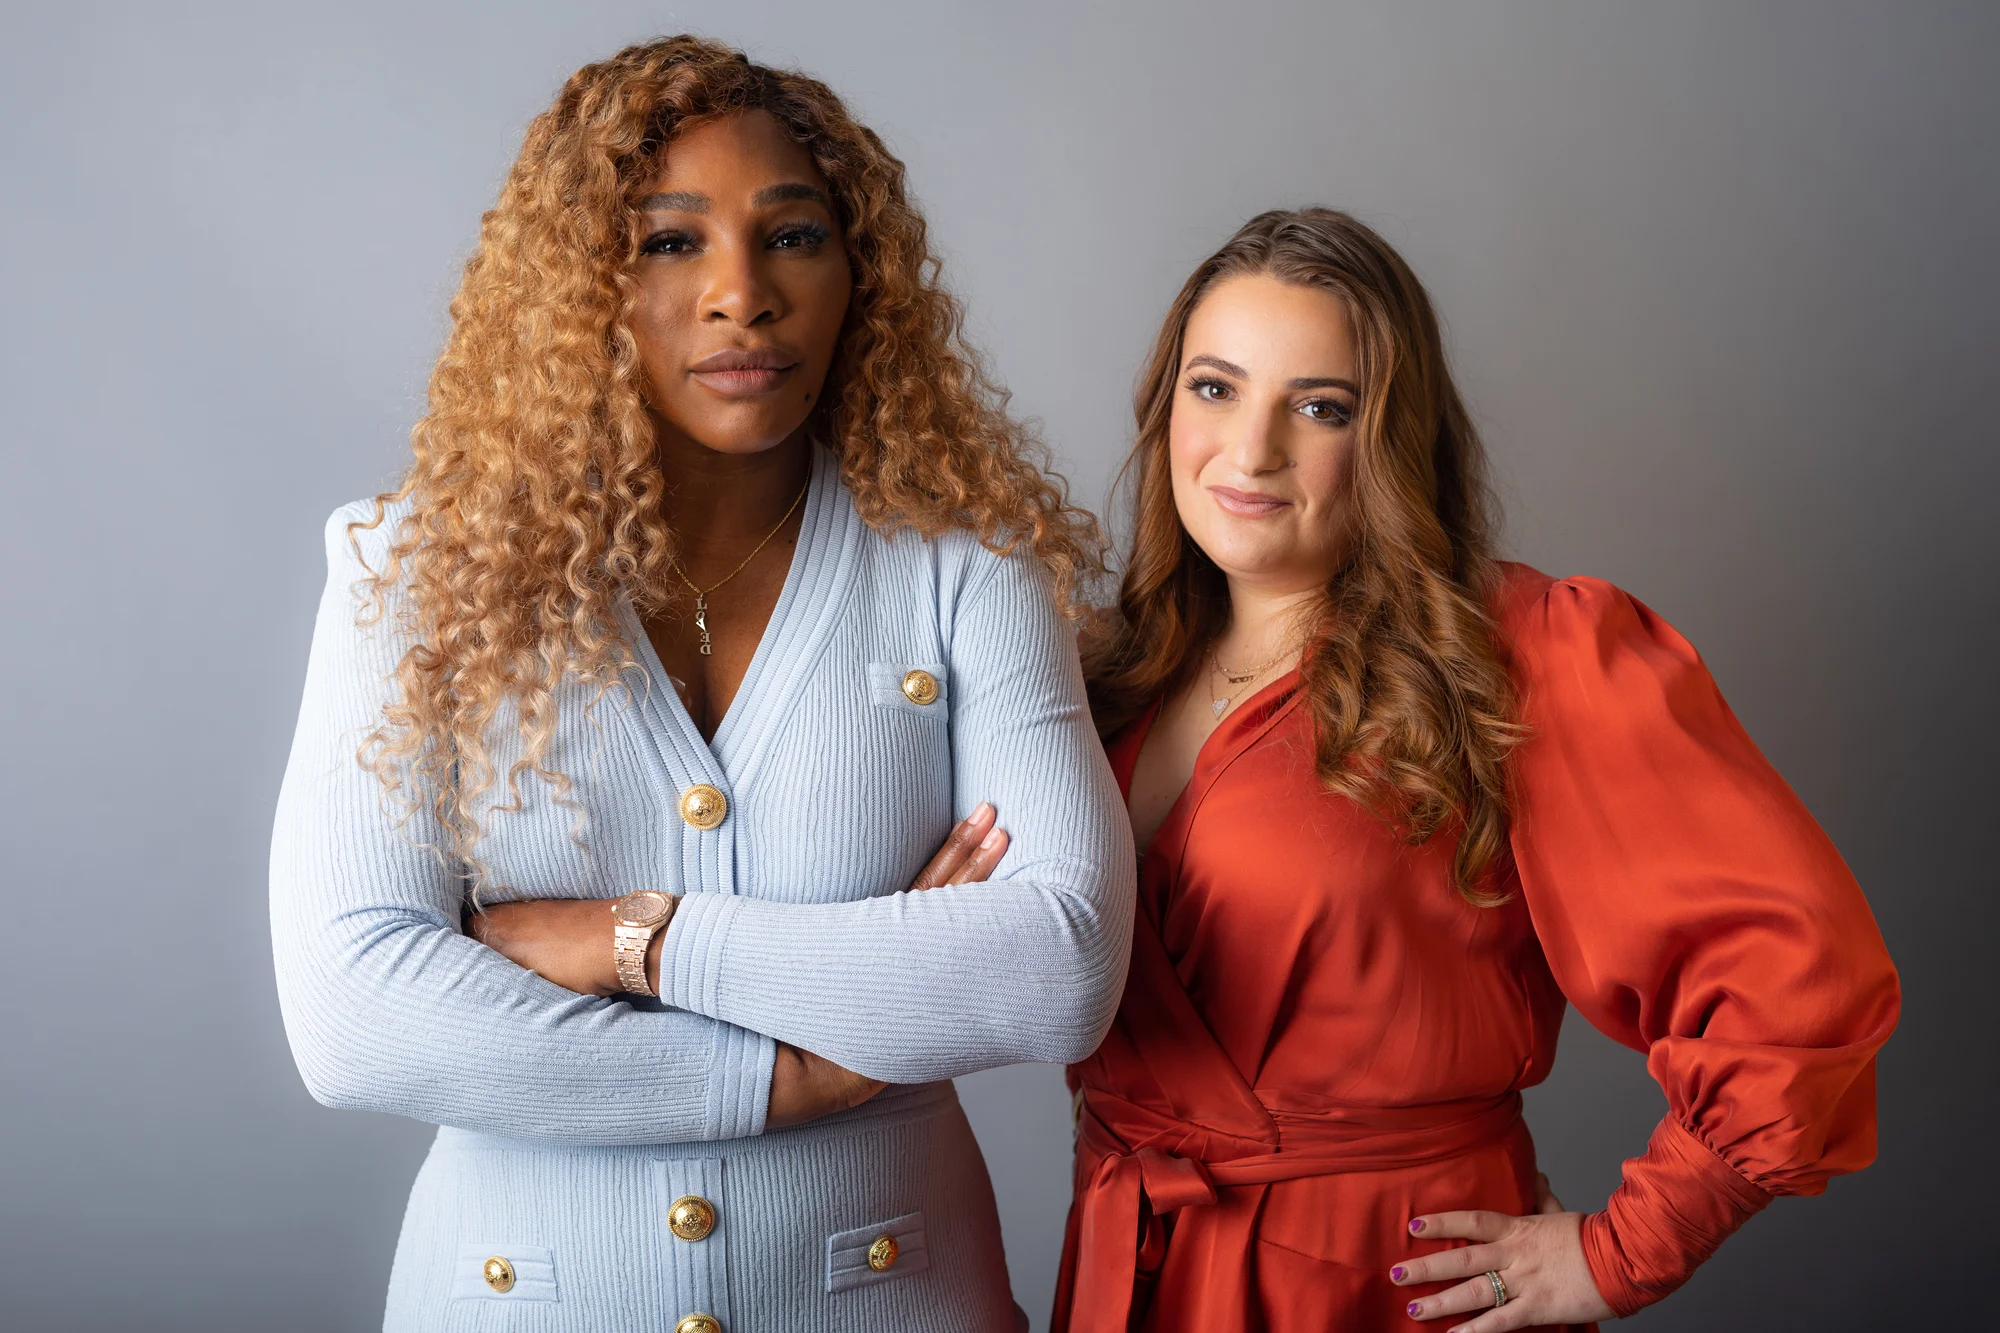 Serena Williams folds her arms and wears a light blue sweater with bronze buttons. Alison Rapaport Stillman places her arms on her hips and wears a bright red dress with long sleeves and a matching red belt.